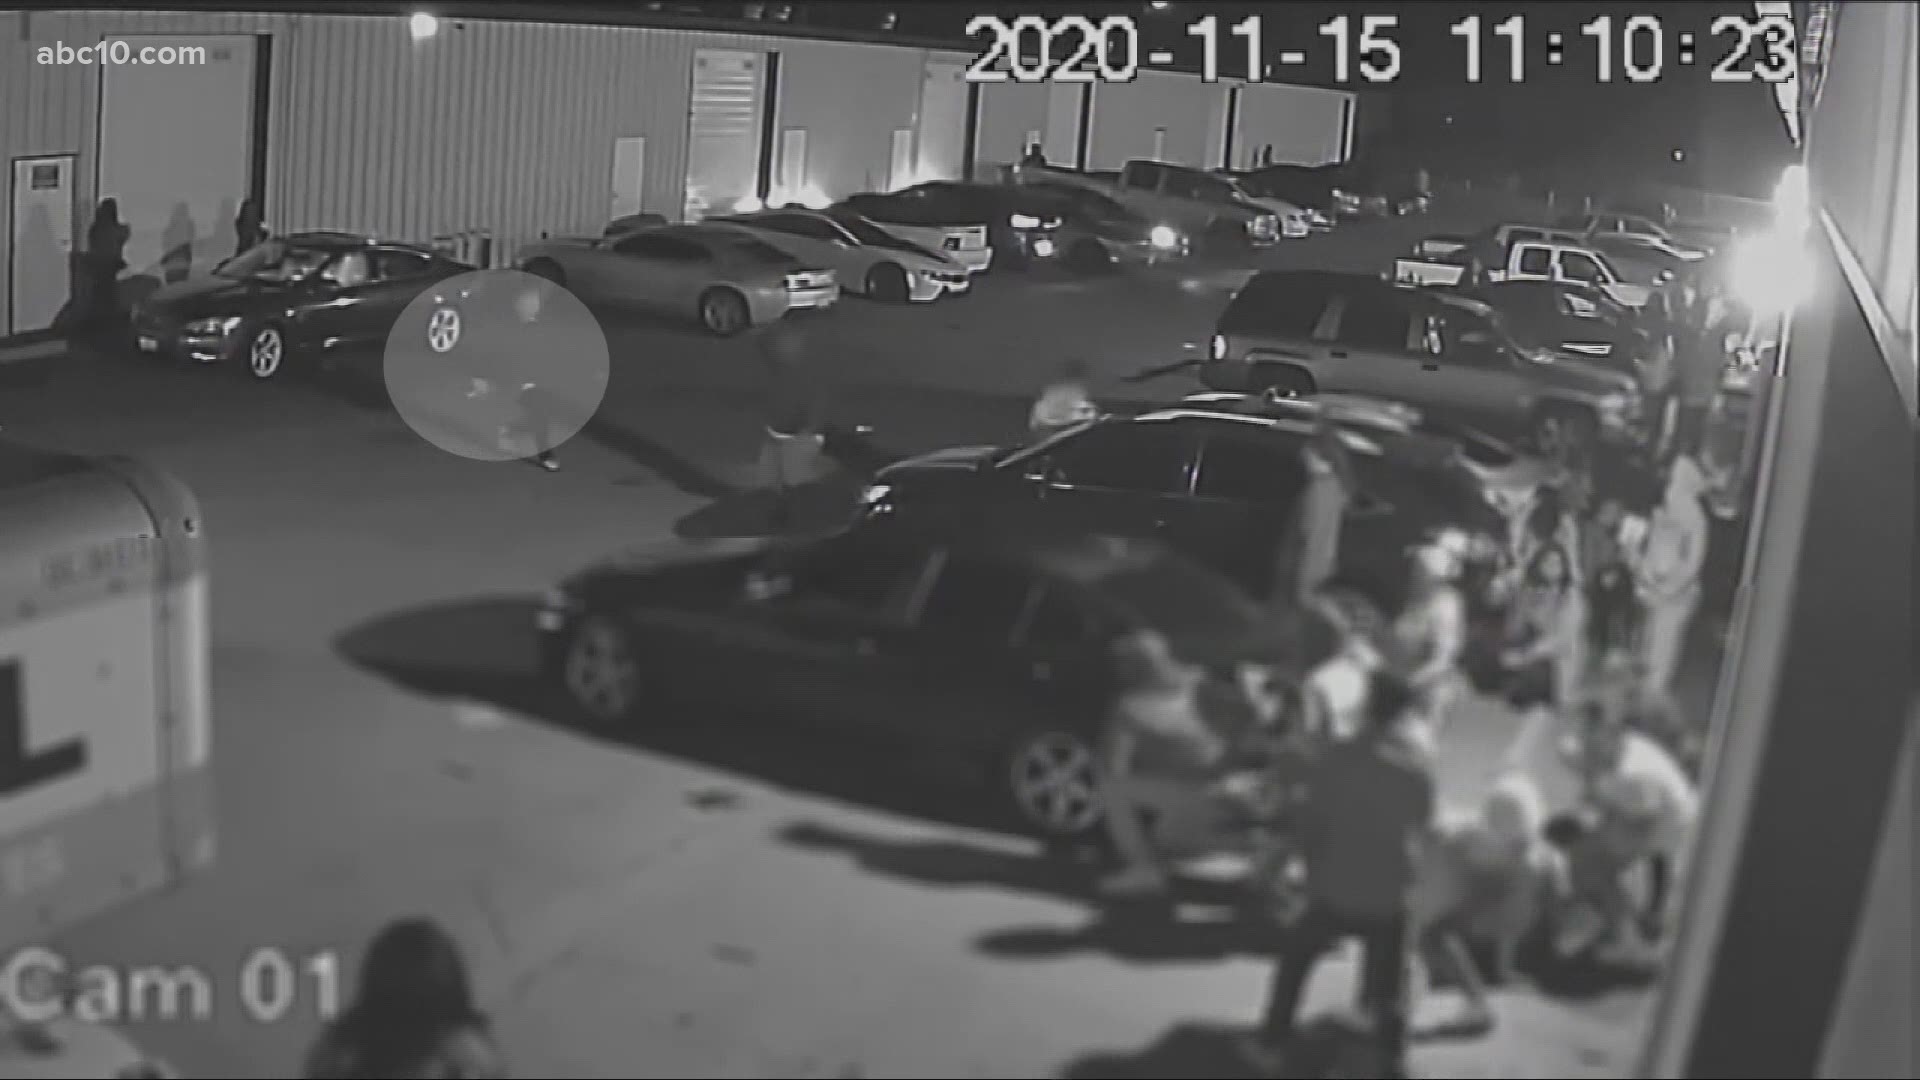 Sacramento police released body cam and surveillance footage of a shooting by one of their sergeants that killed a man waving a gun at a Nov. 14 boxing event.